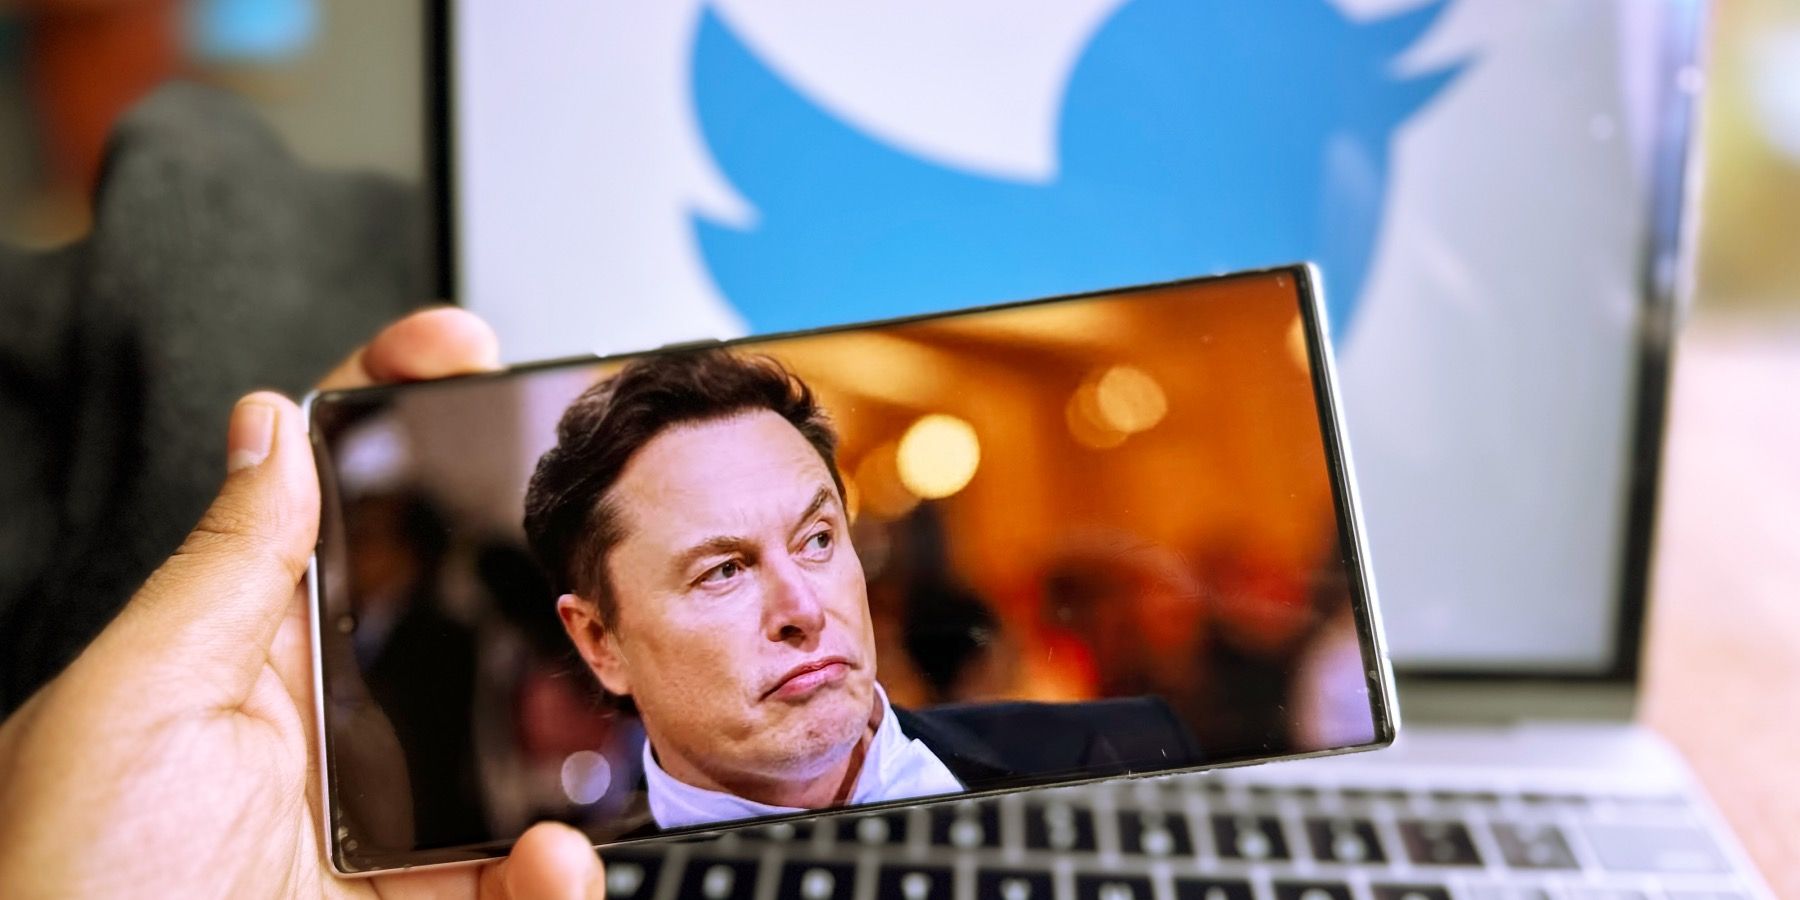 Elon Musk against the backdrop of a Twitter insignia.